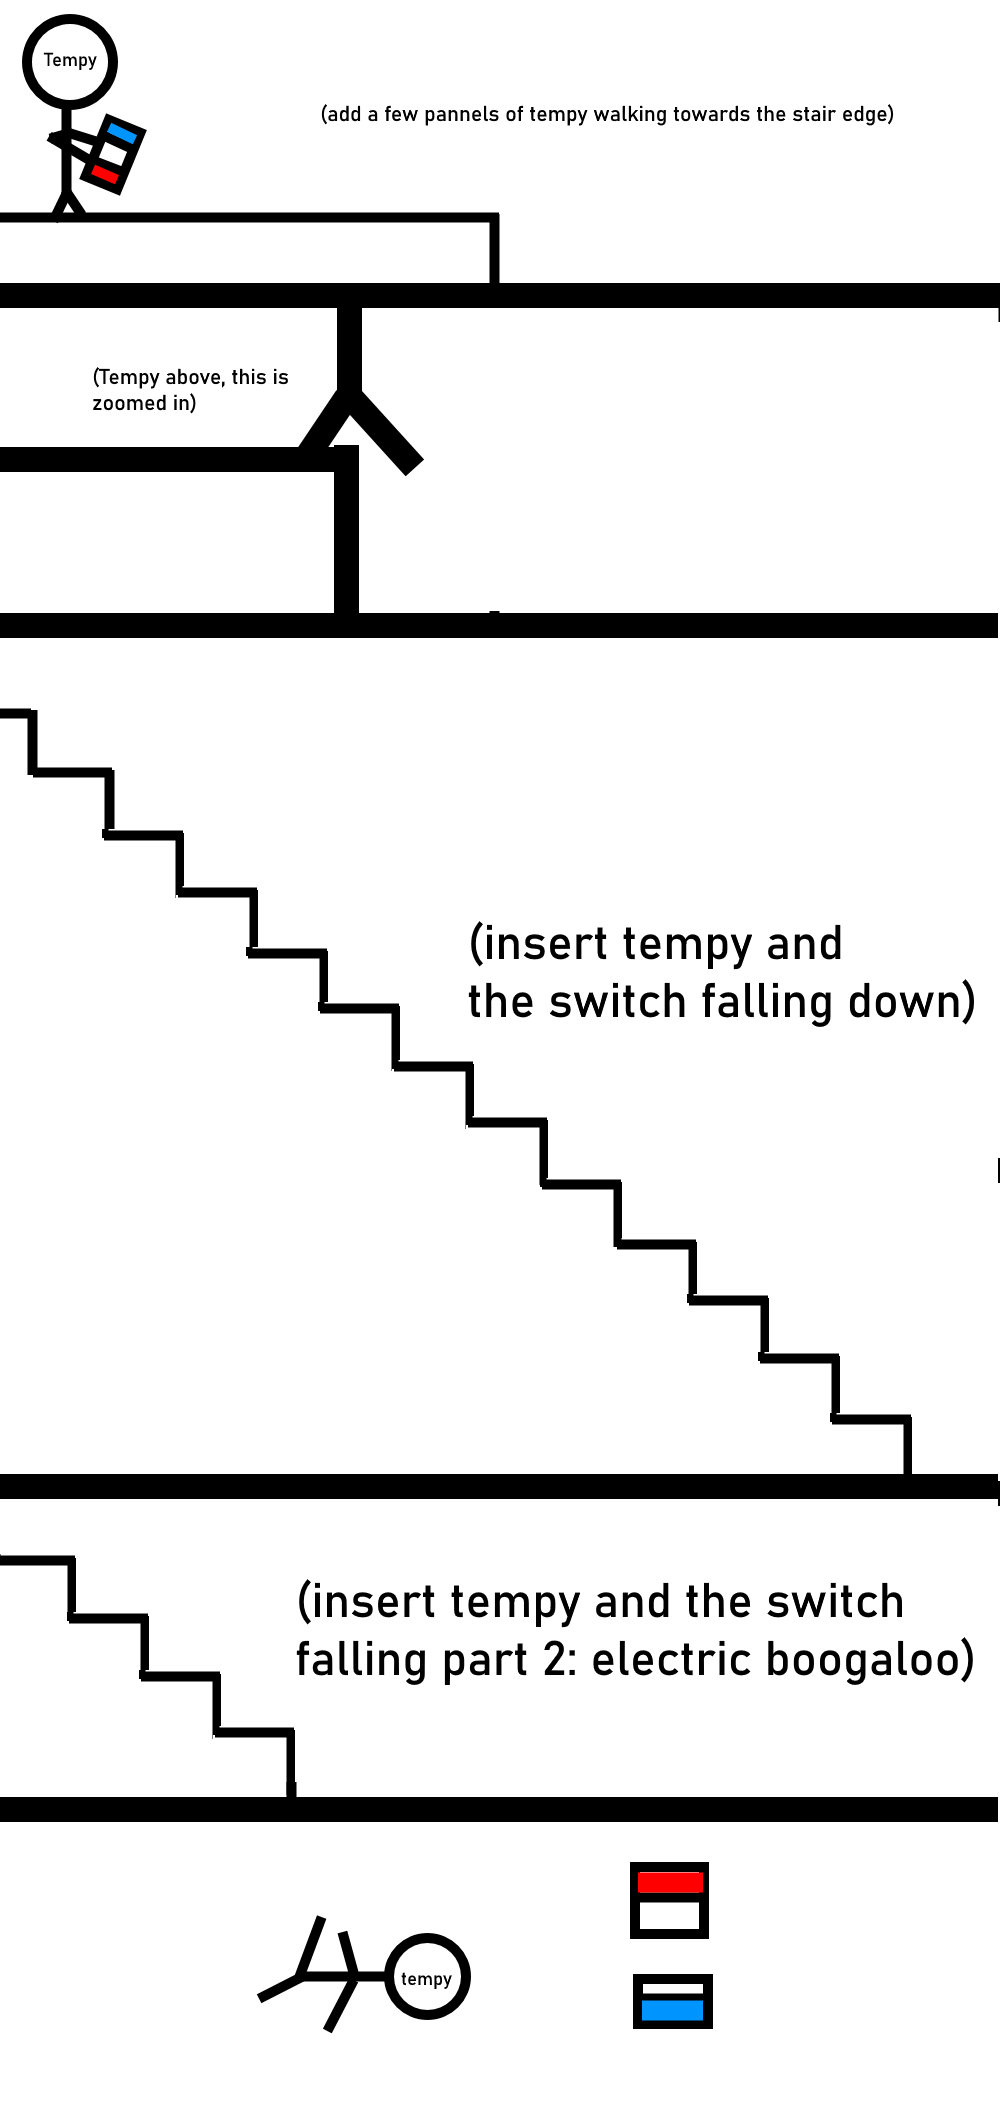 tempy_stairs.png